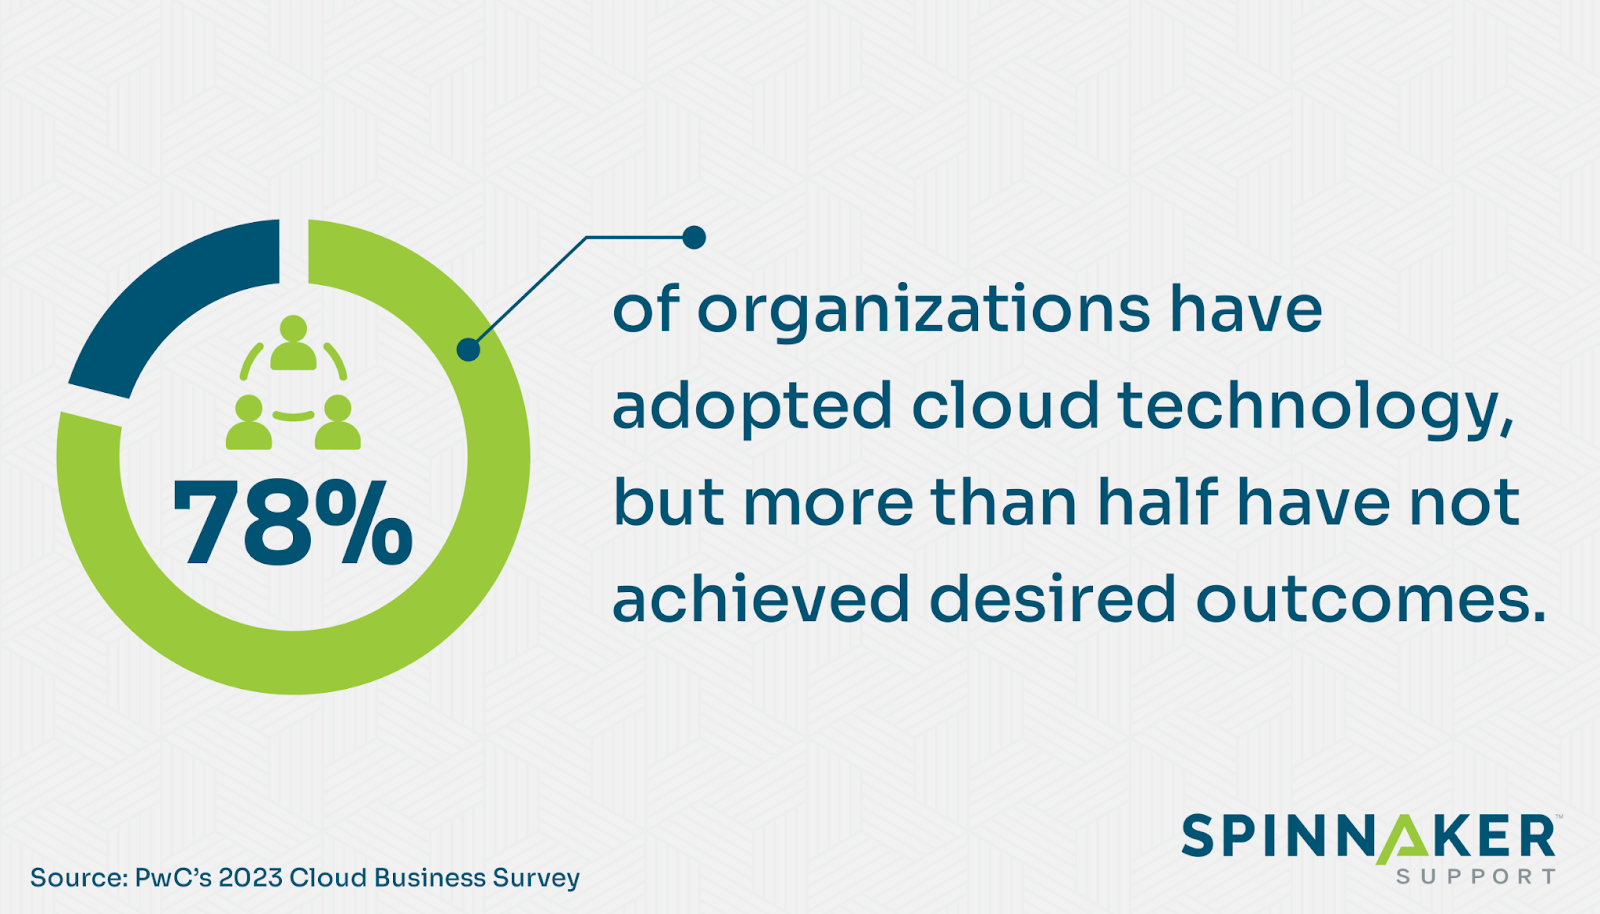 78% of organizations have adopted cloud technology